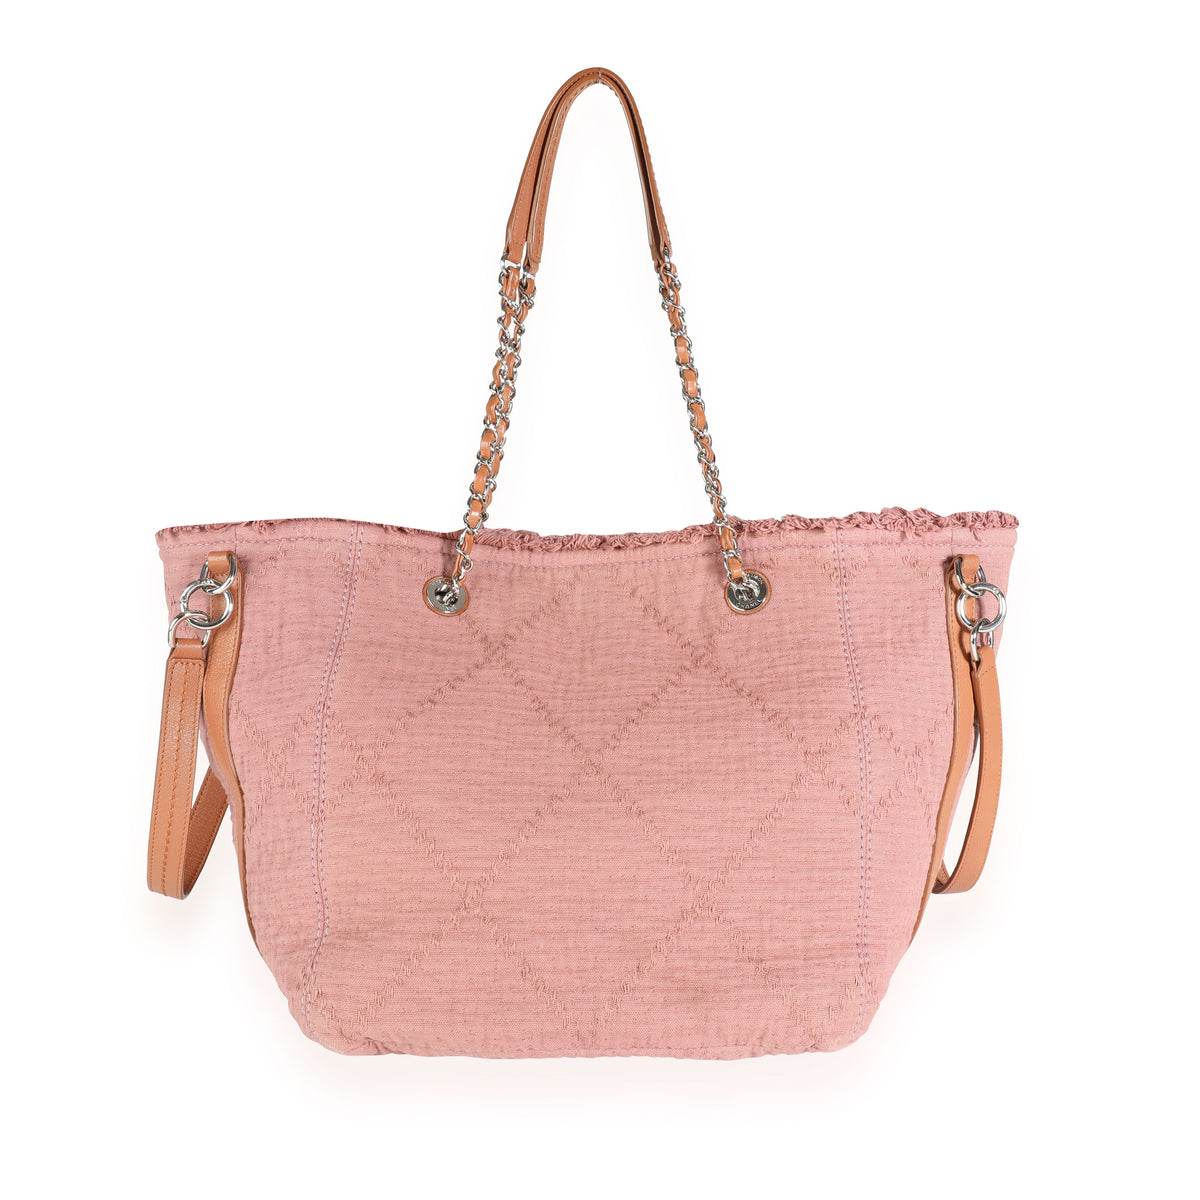 Chanel Dusty Rose Double Face Fringe Deauville Tote